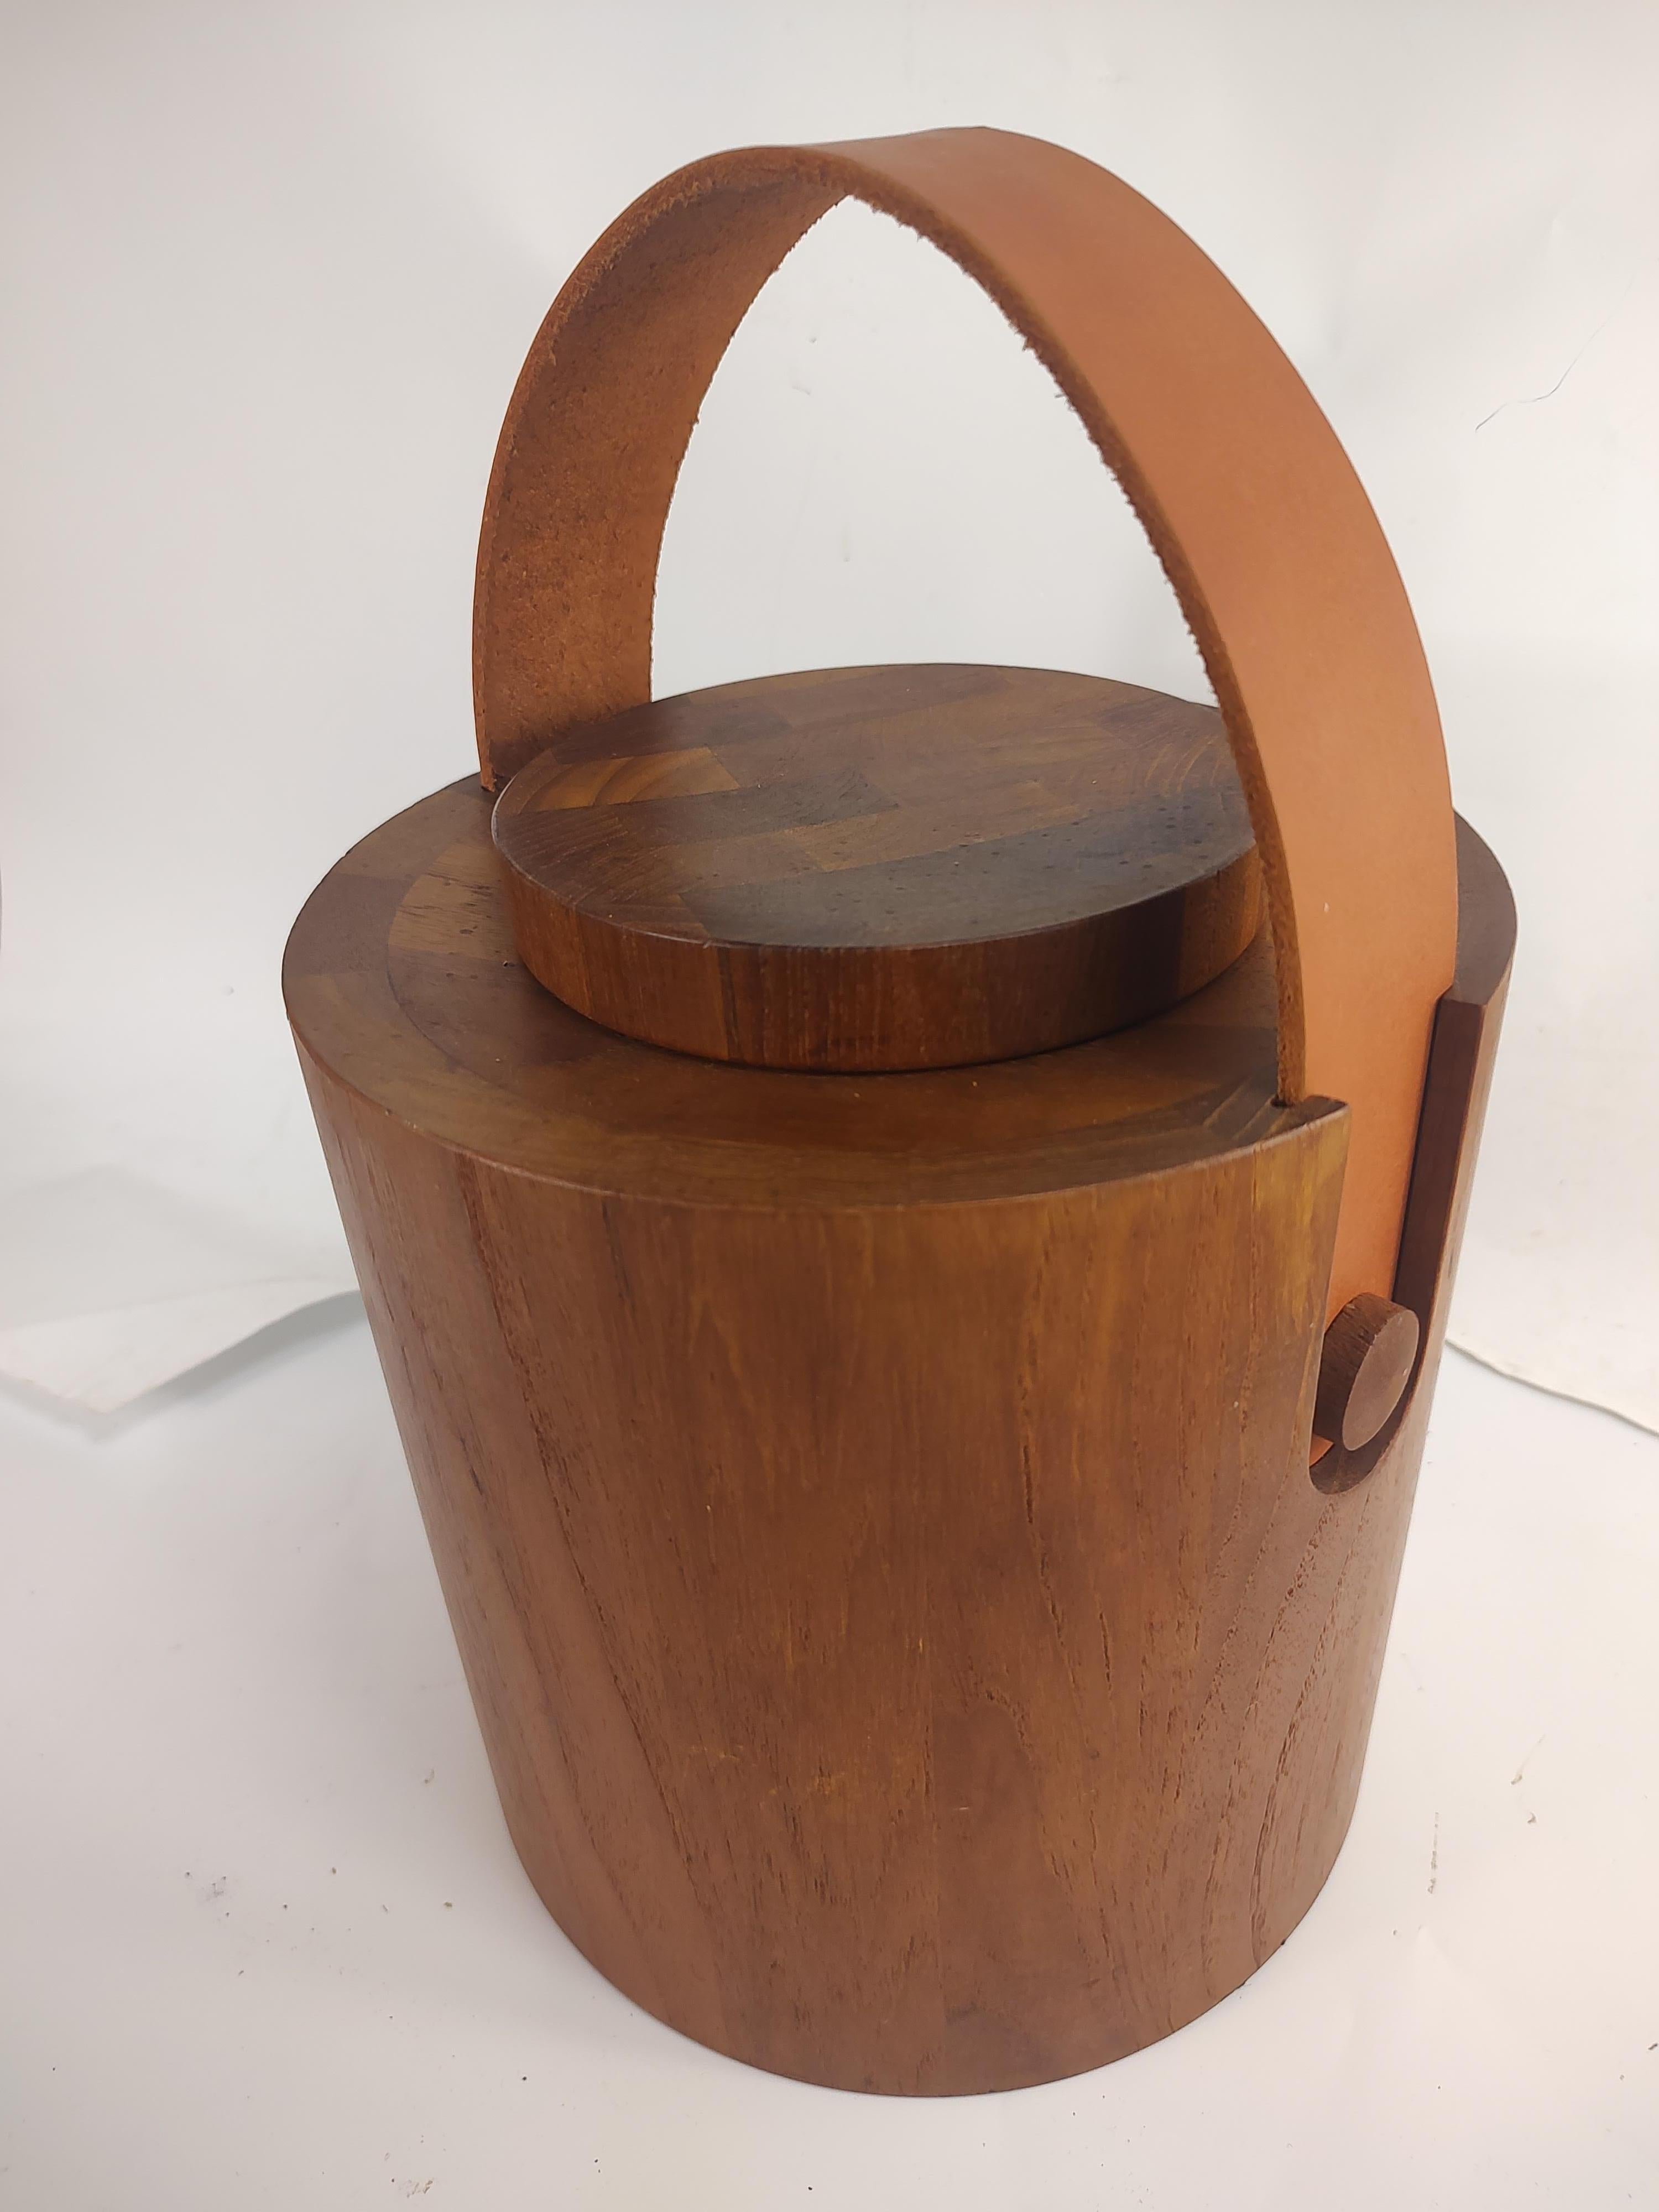 Danish Mid Century Modern Teak Ice Bucket with a Leather Strap by Nessen C1960 Denmark  For Sale